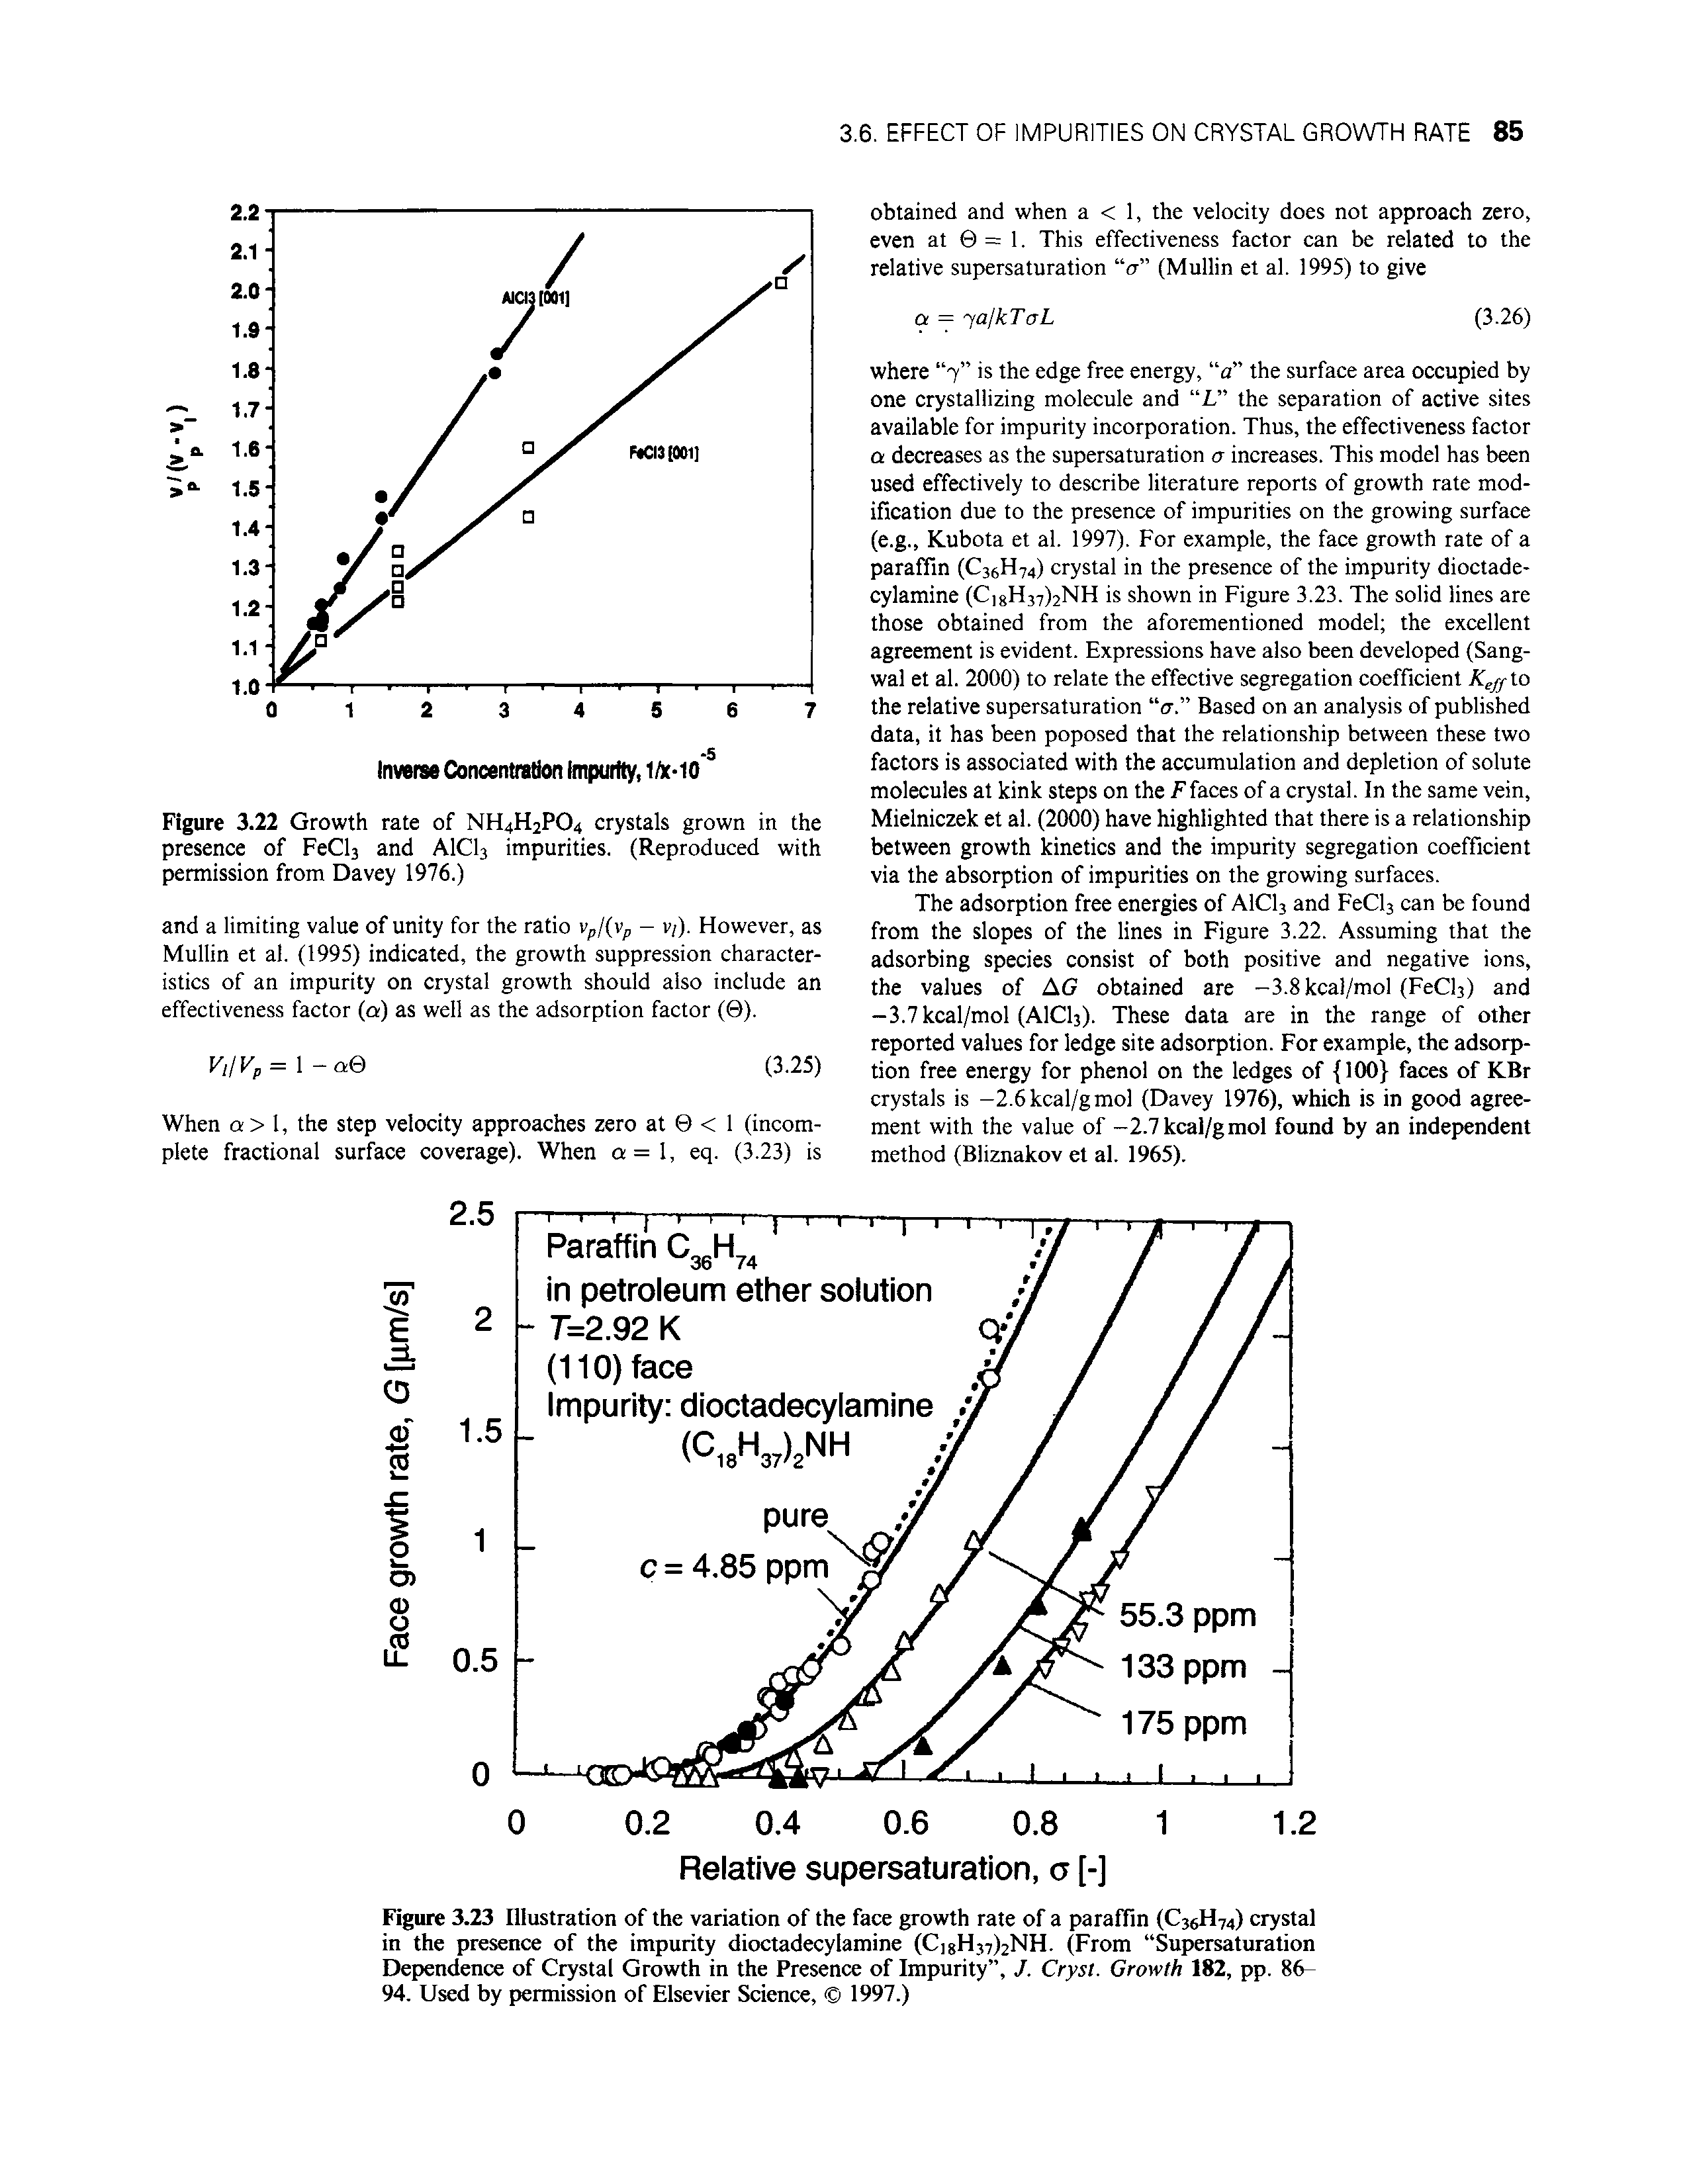 Figure 3.23 Illustration of the variation of the face growth rale of a paraffin (C36H74) crystal in the presence of the impurity dioctadecylamine (Ci8H37)2NH. (From Supersaturation Dependence of Crystal Growth in the Presence of Impurity , J. Crysl. Growth 182, pp. 86 94. Used by permission of Elsevier Science, 1997.)...